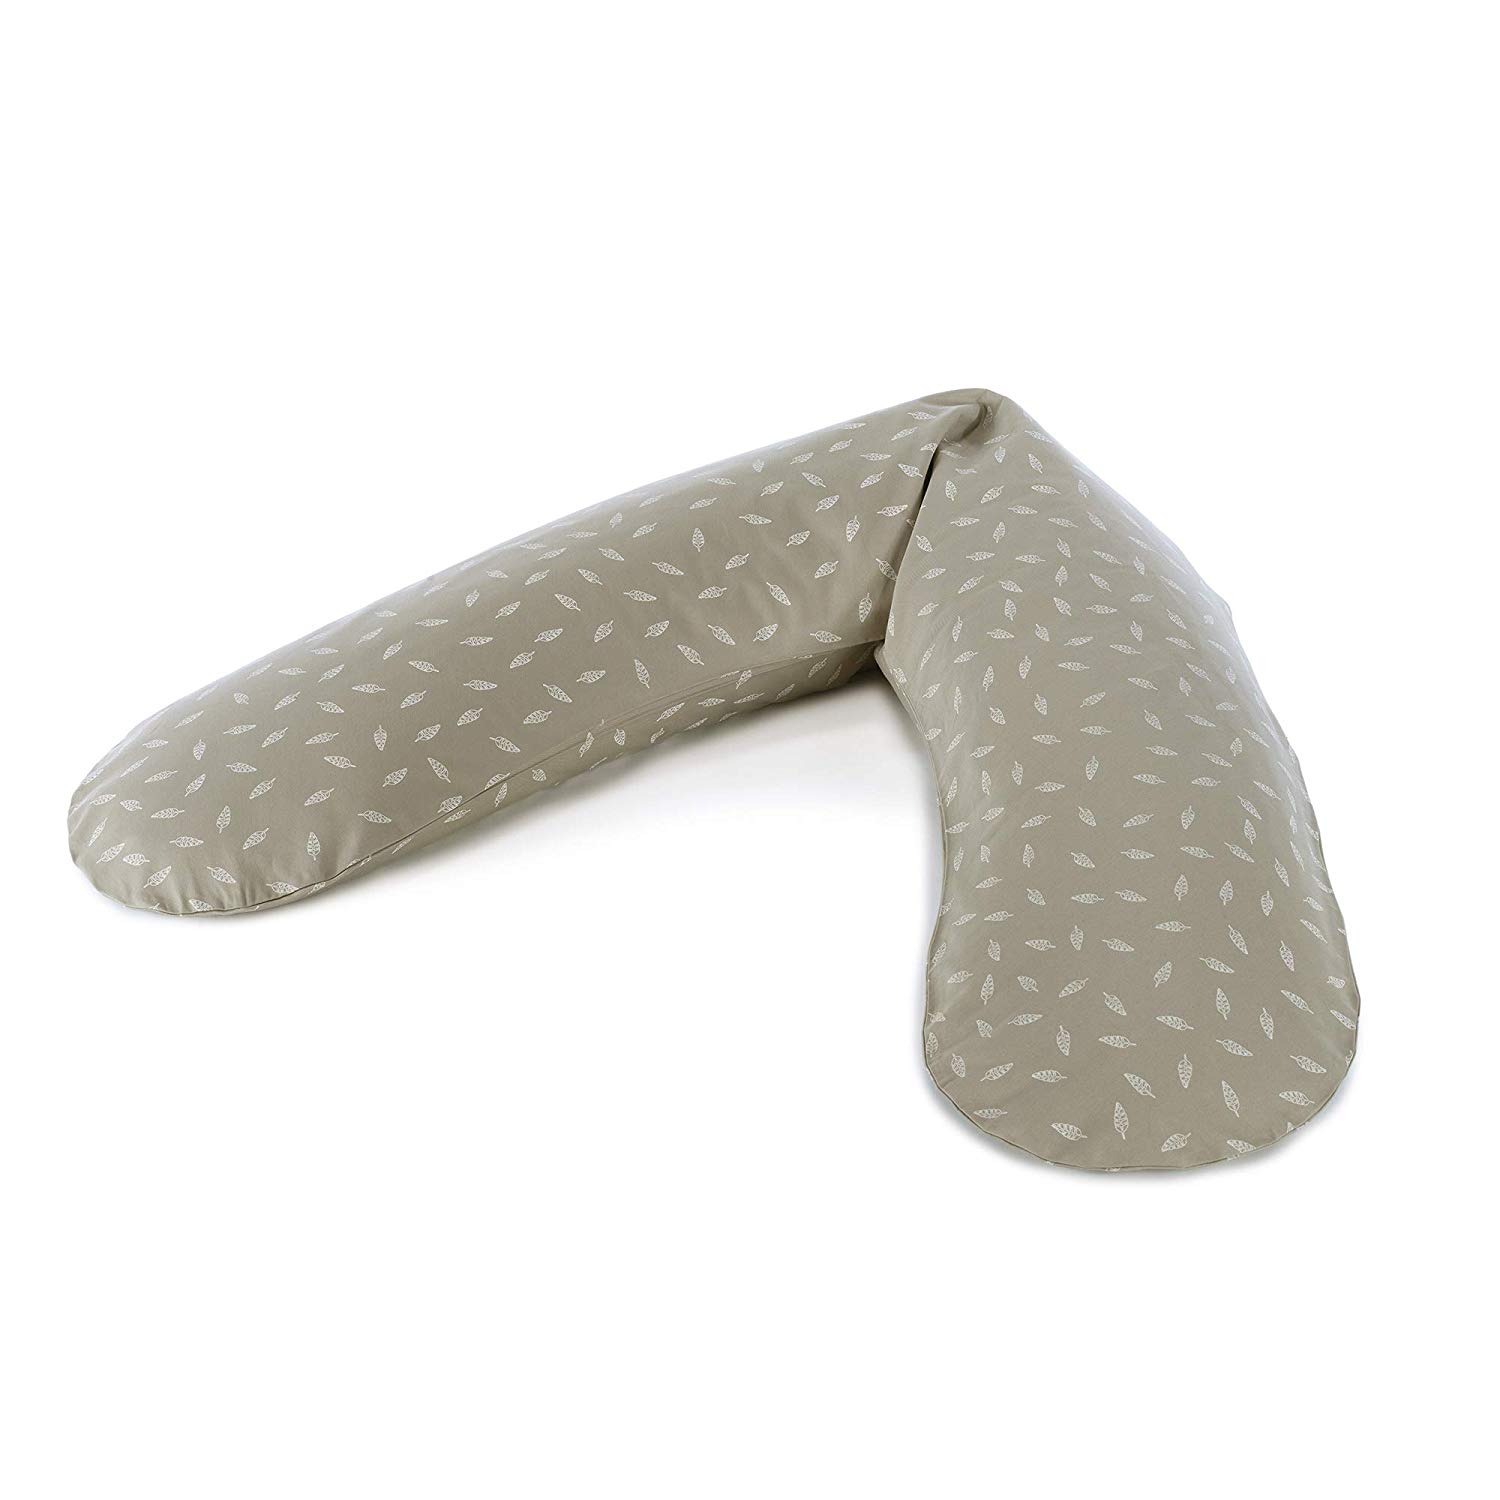 The Original Theraline Nursing Pillow 190 cm Micro Beads Filling Including Cover Leaf Dance